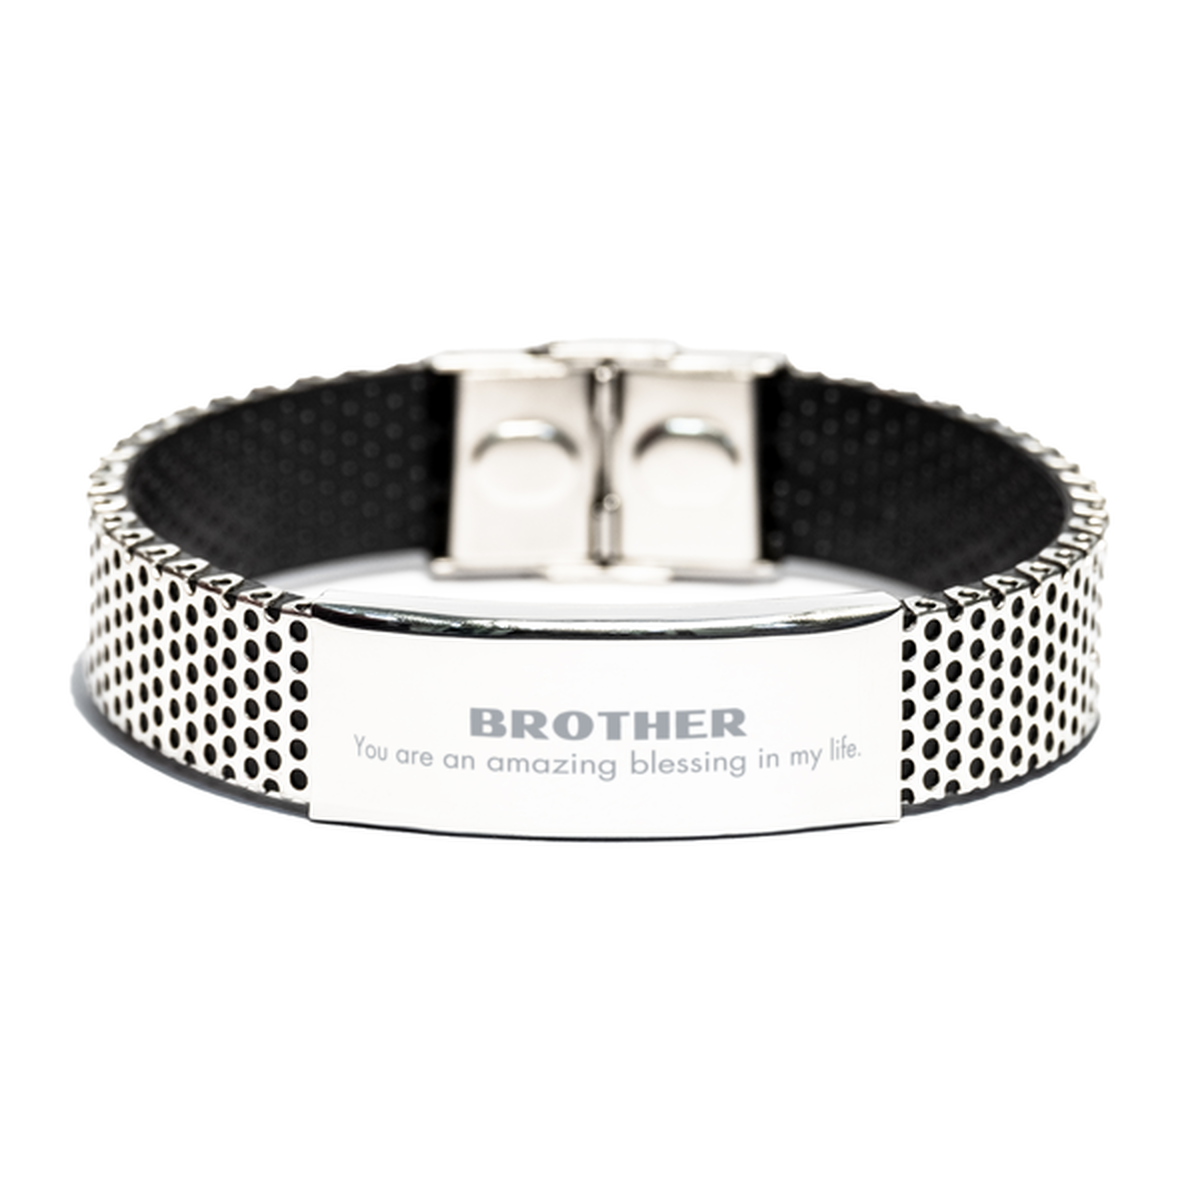 Brother Stainless Steel Bracelet, You are an amazing blessing in my life, Thank You Gifts For Brother, Inspirational Birthday Christmas Unique Gifts For Brother